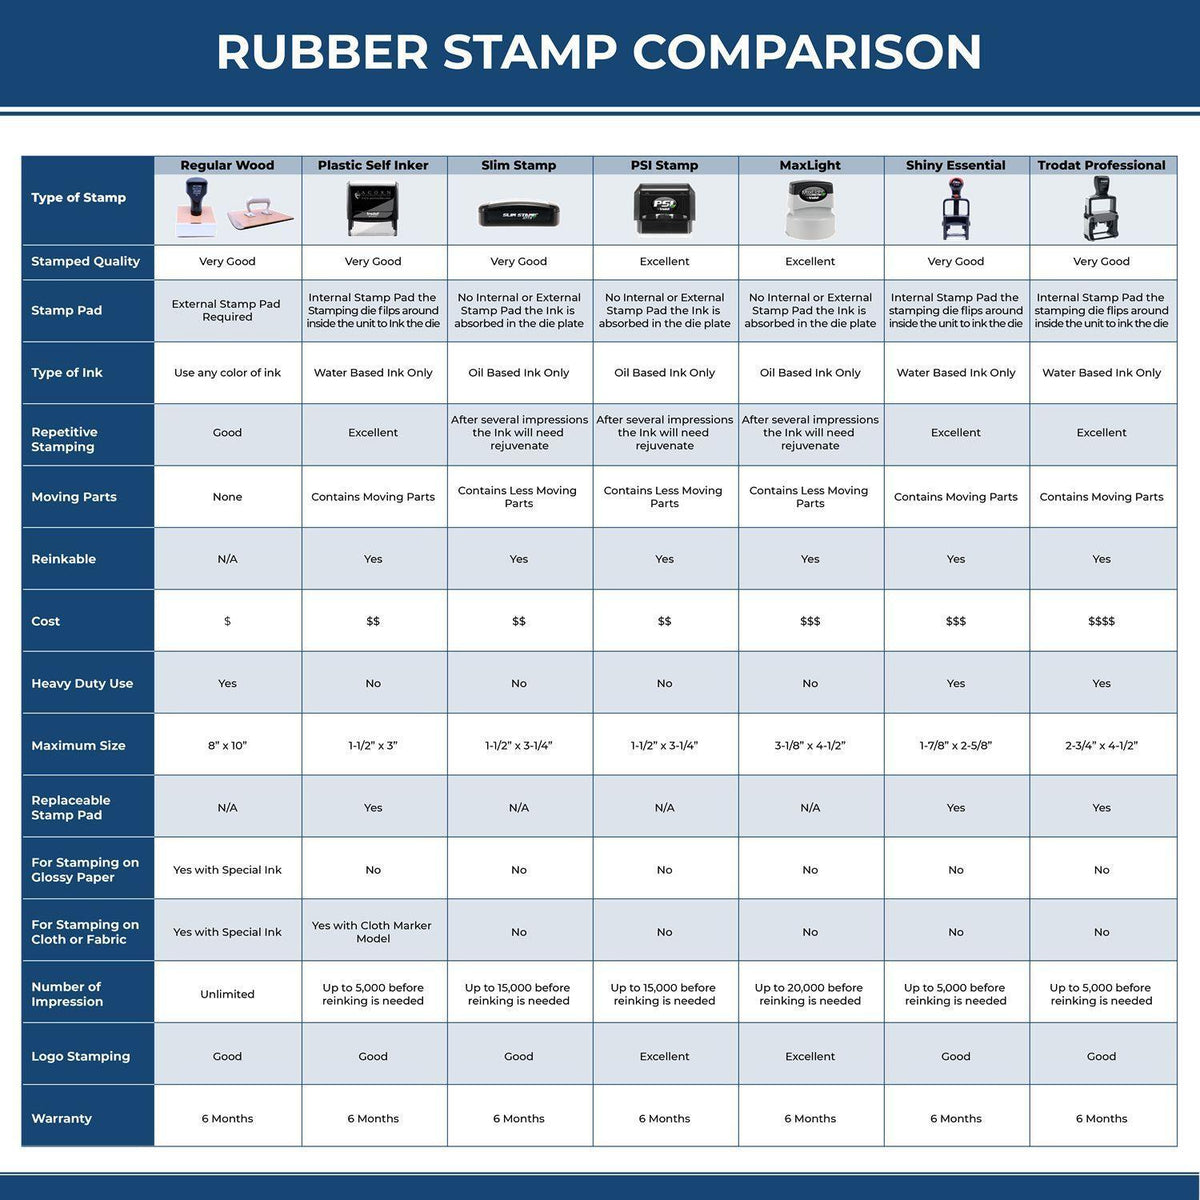 Large Pre-Inked Covid-19 Tested Stamp 5514SLIM Rubber Stamp Comparison